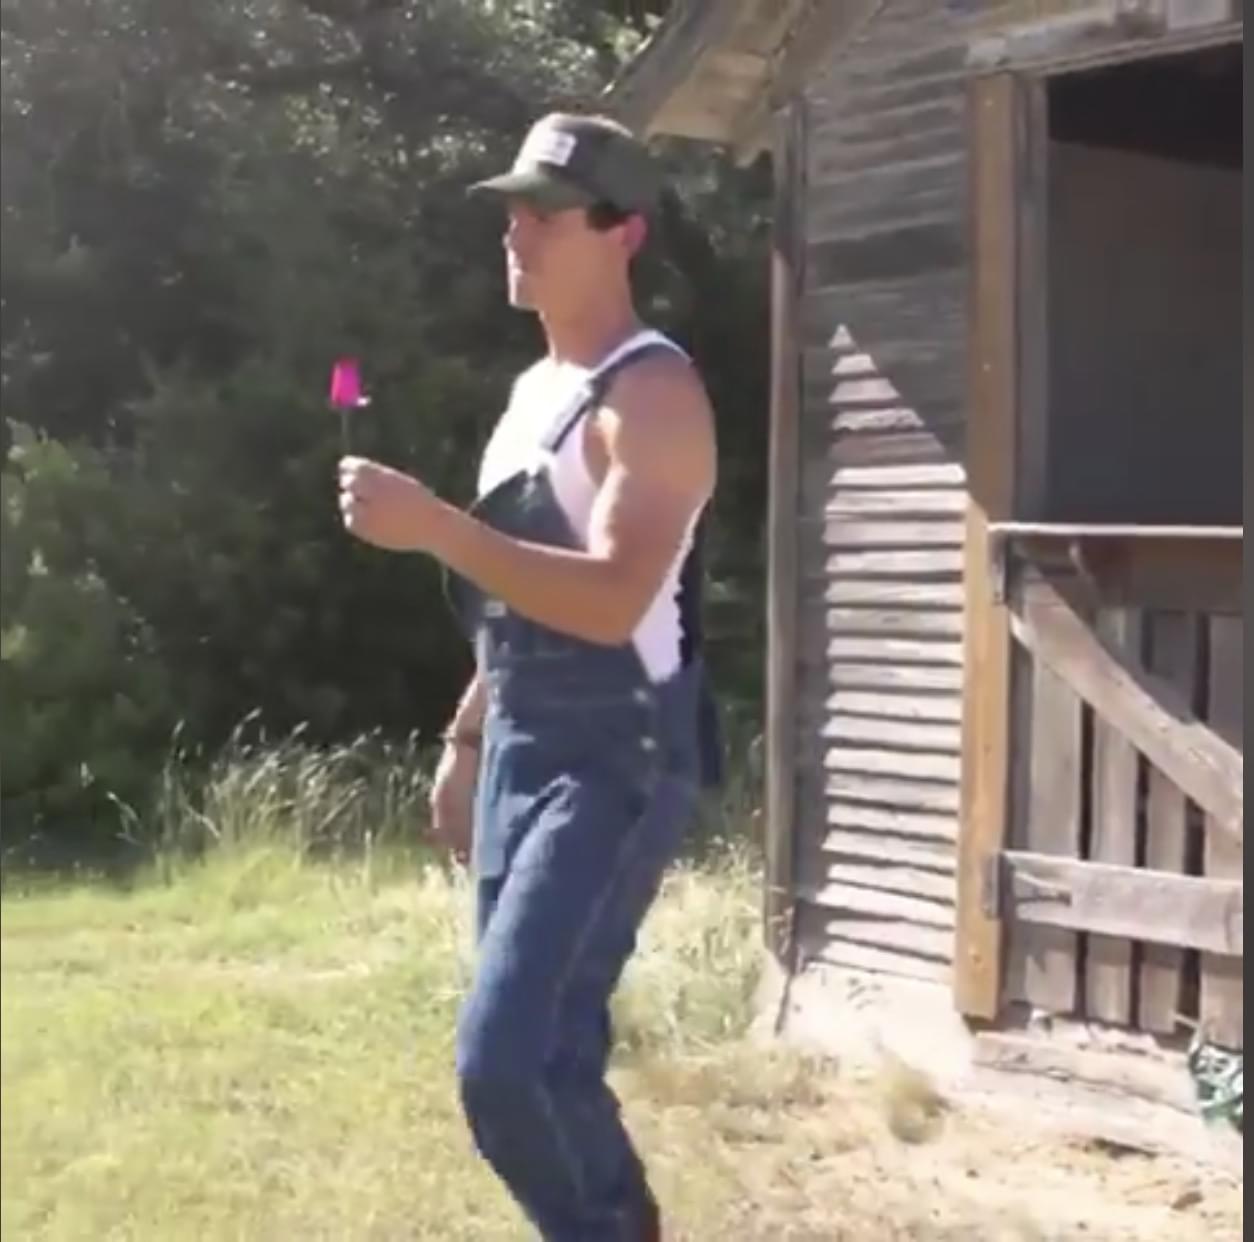 Watch Granger Smith on the Bachelorette & check out a NEW lyric video for “You’re In It!”